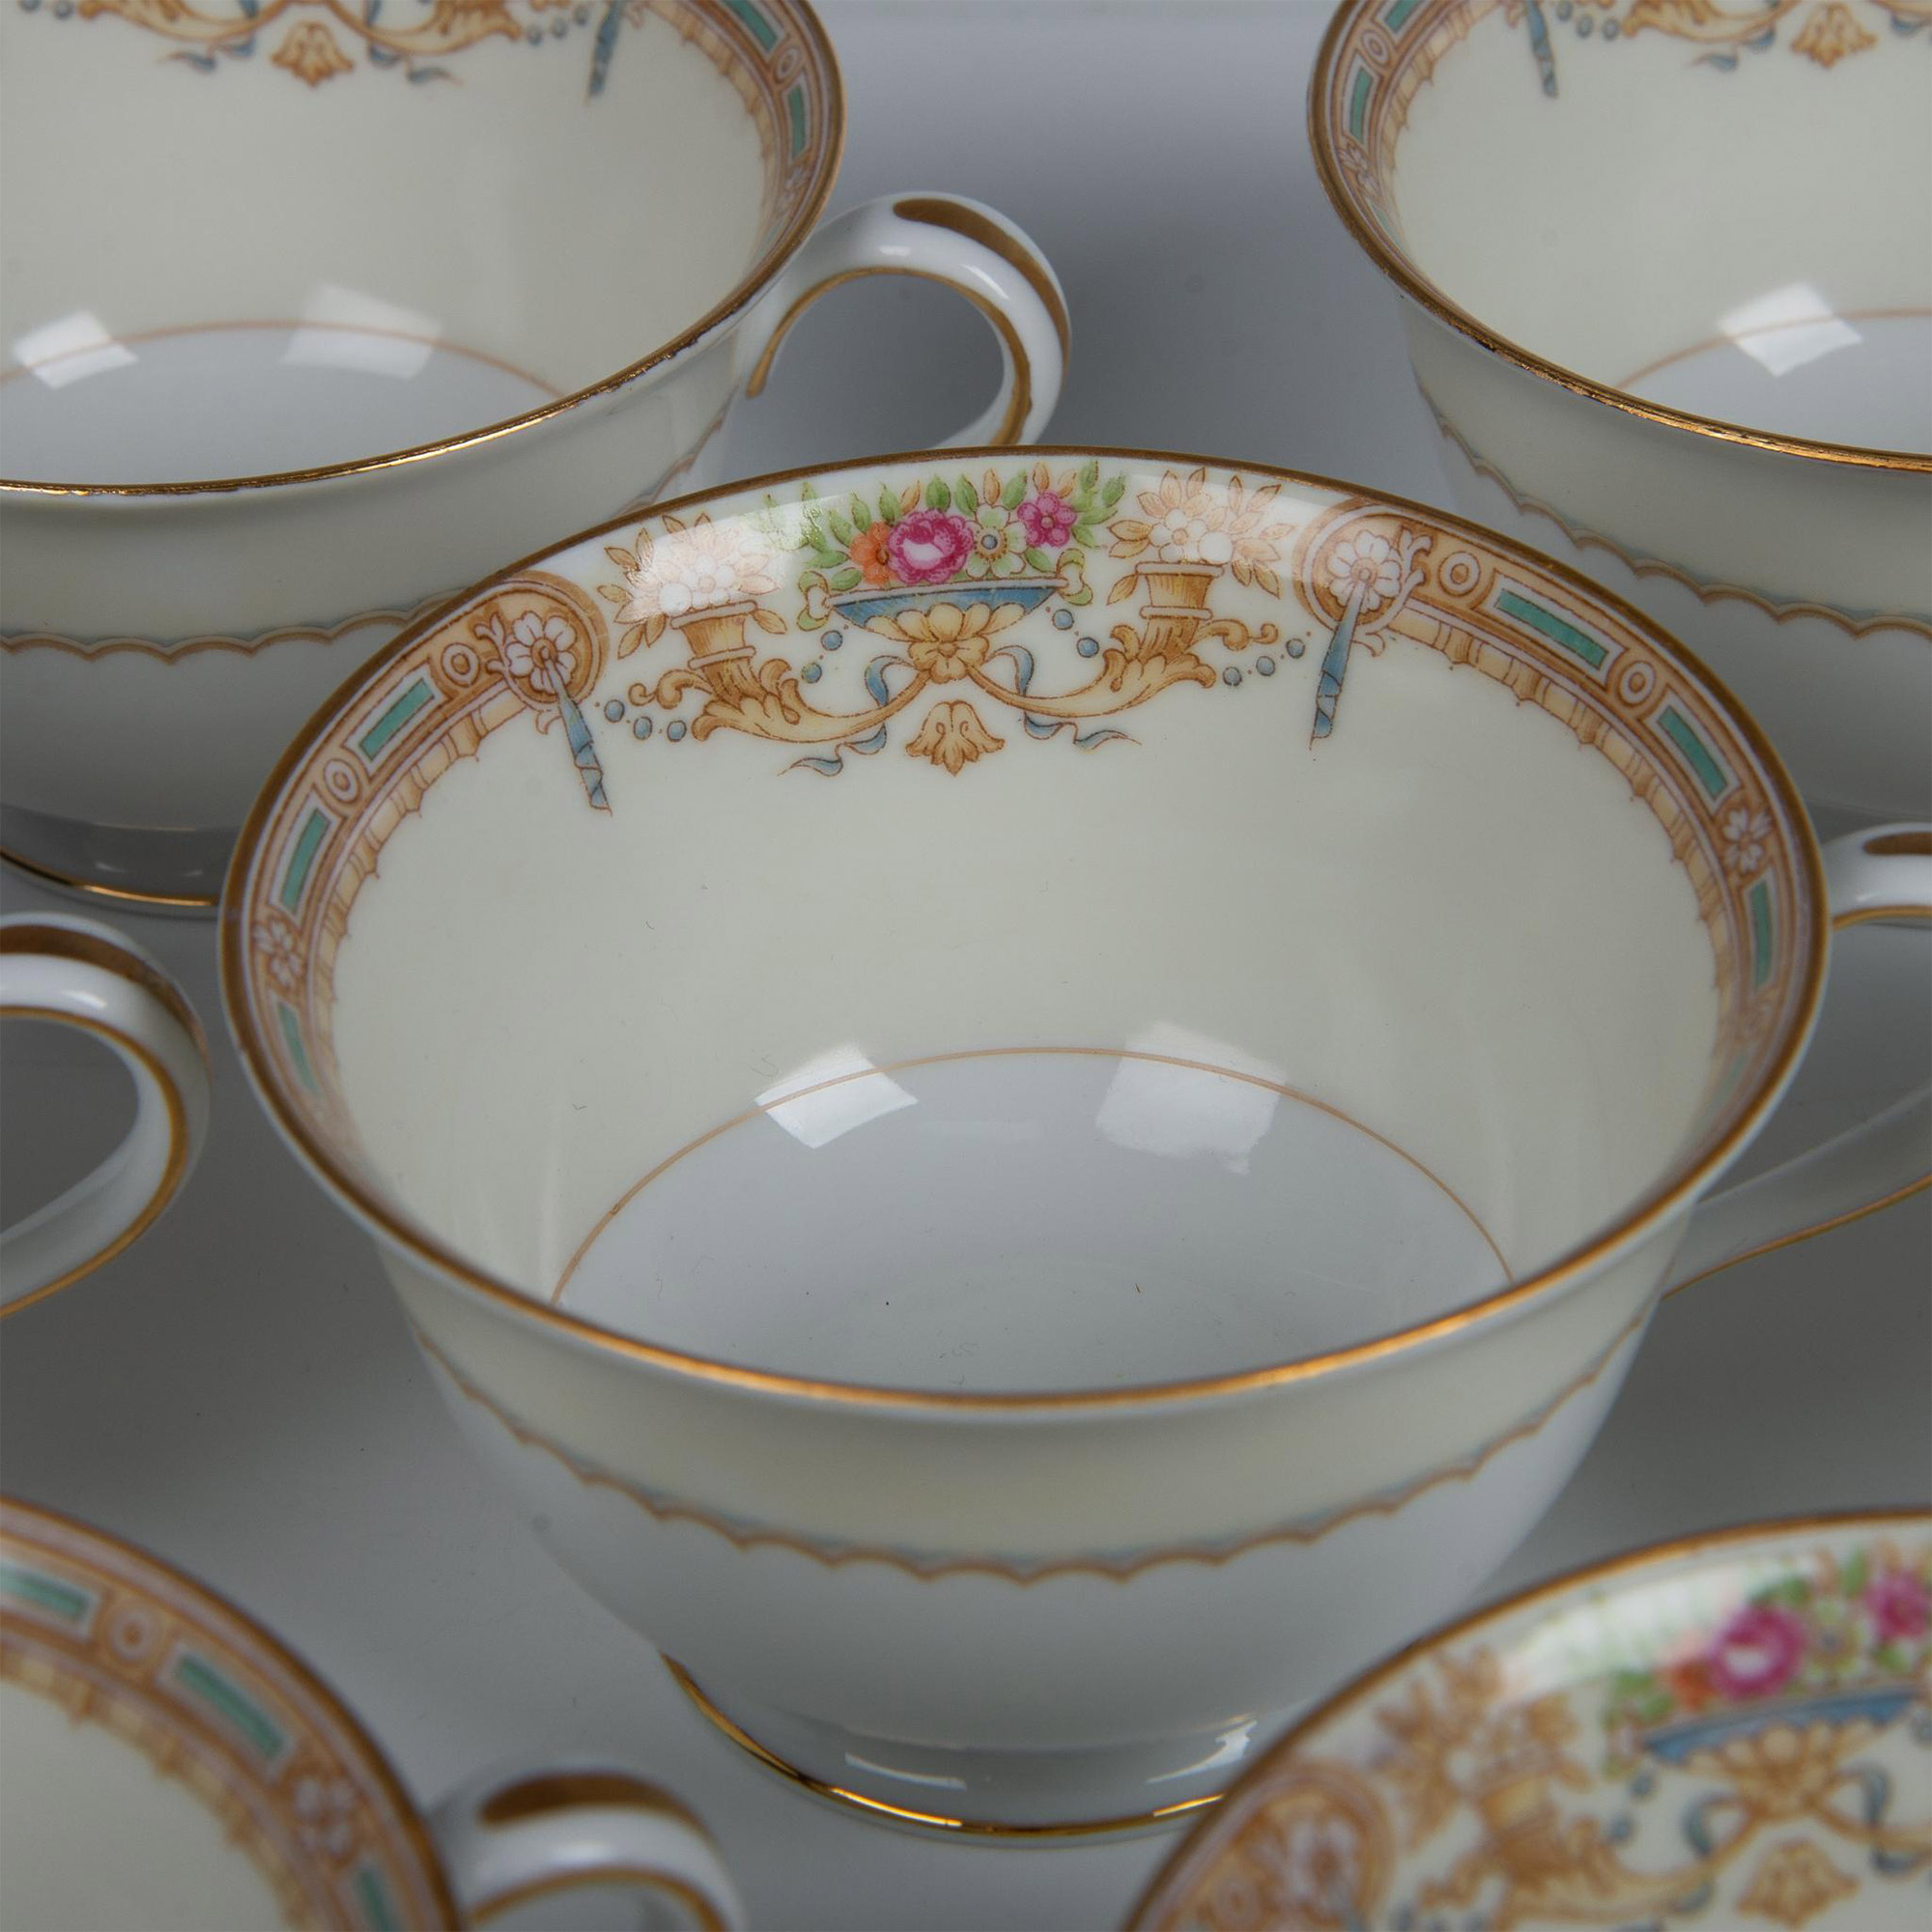 55 pc Vintage Noritake China Dinner Service for 8, Sonora - Image 9 of 11